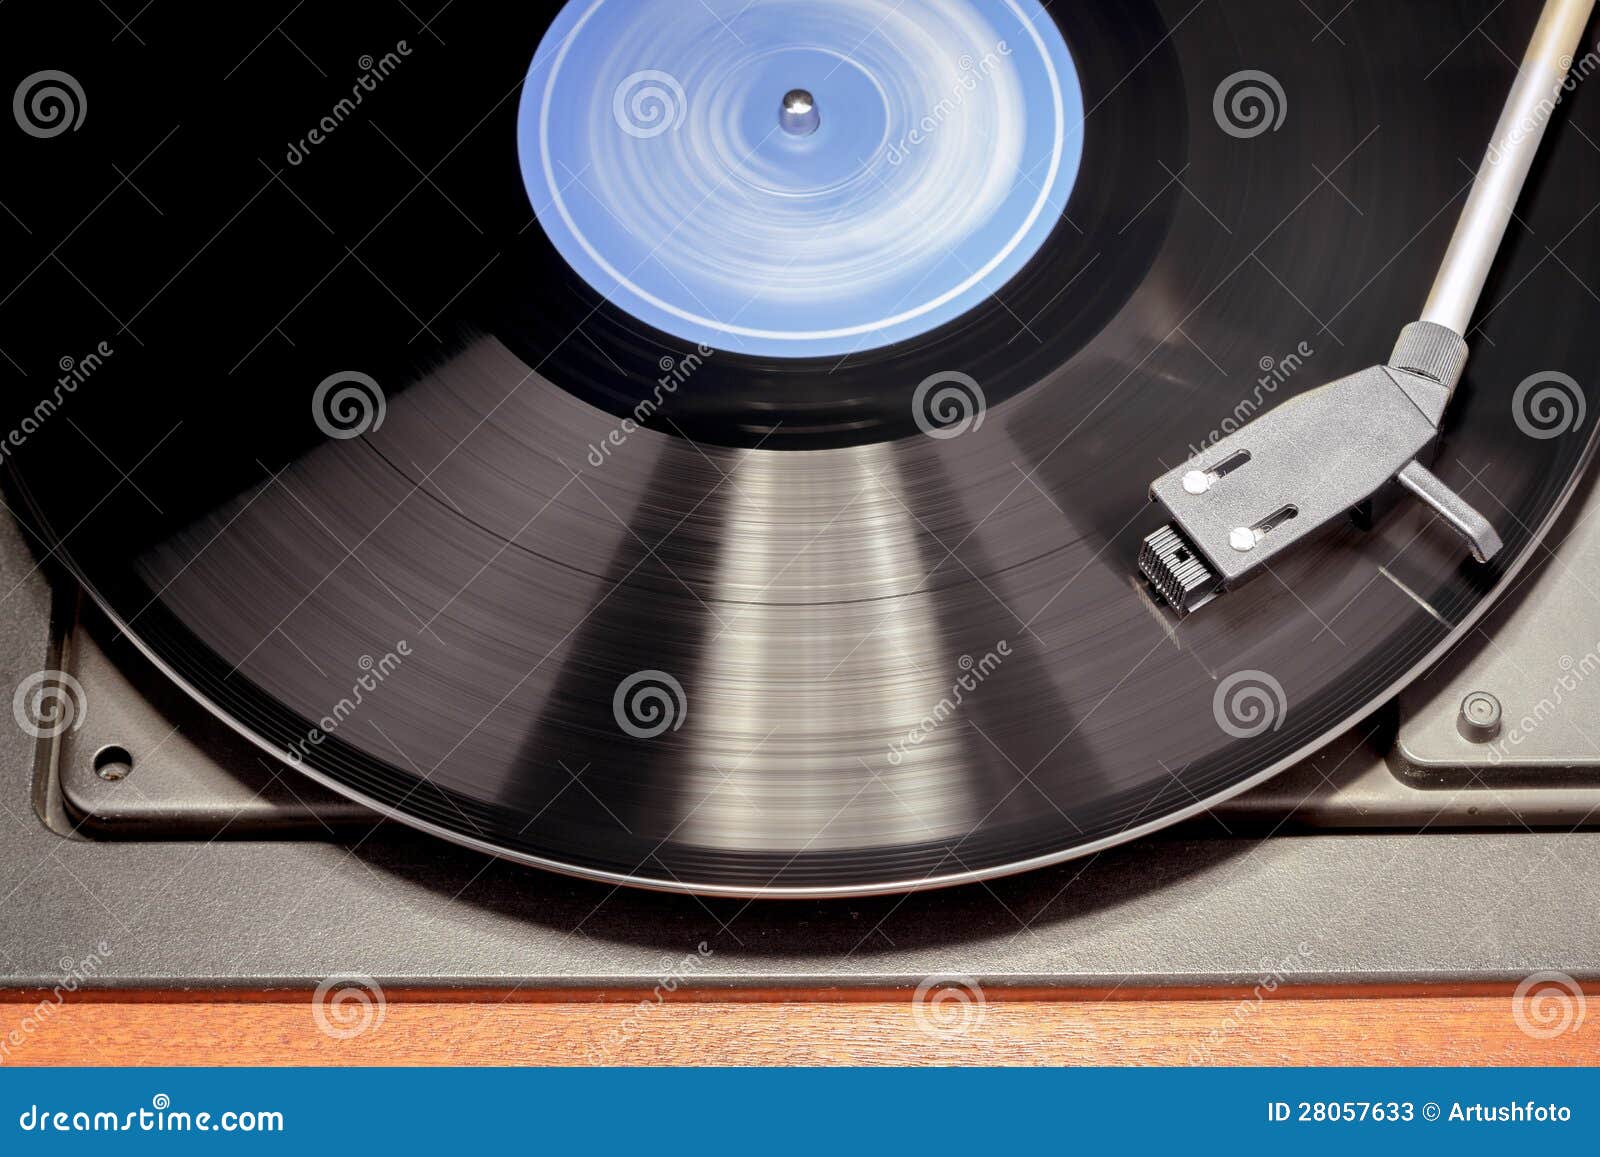 Vintage Record Player with Spinning Vinyl. Stock Image - Image of audio,  electronic: 28057633